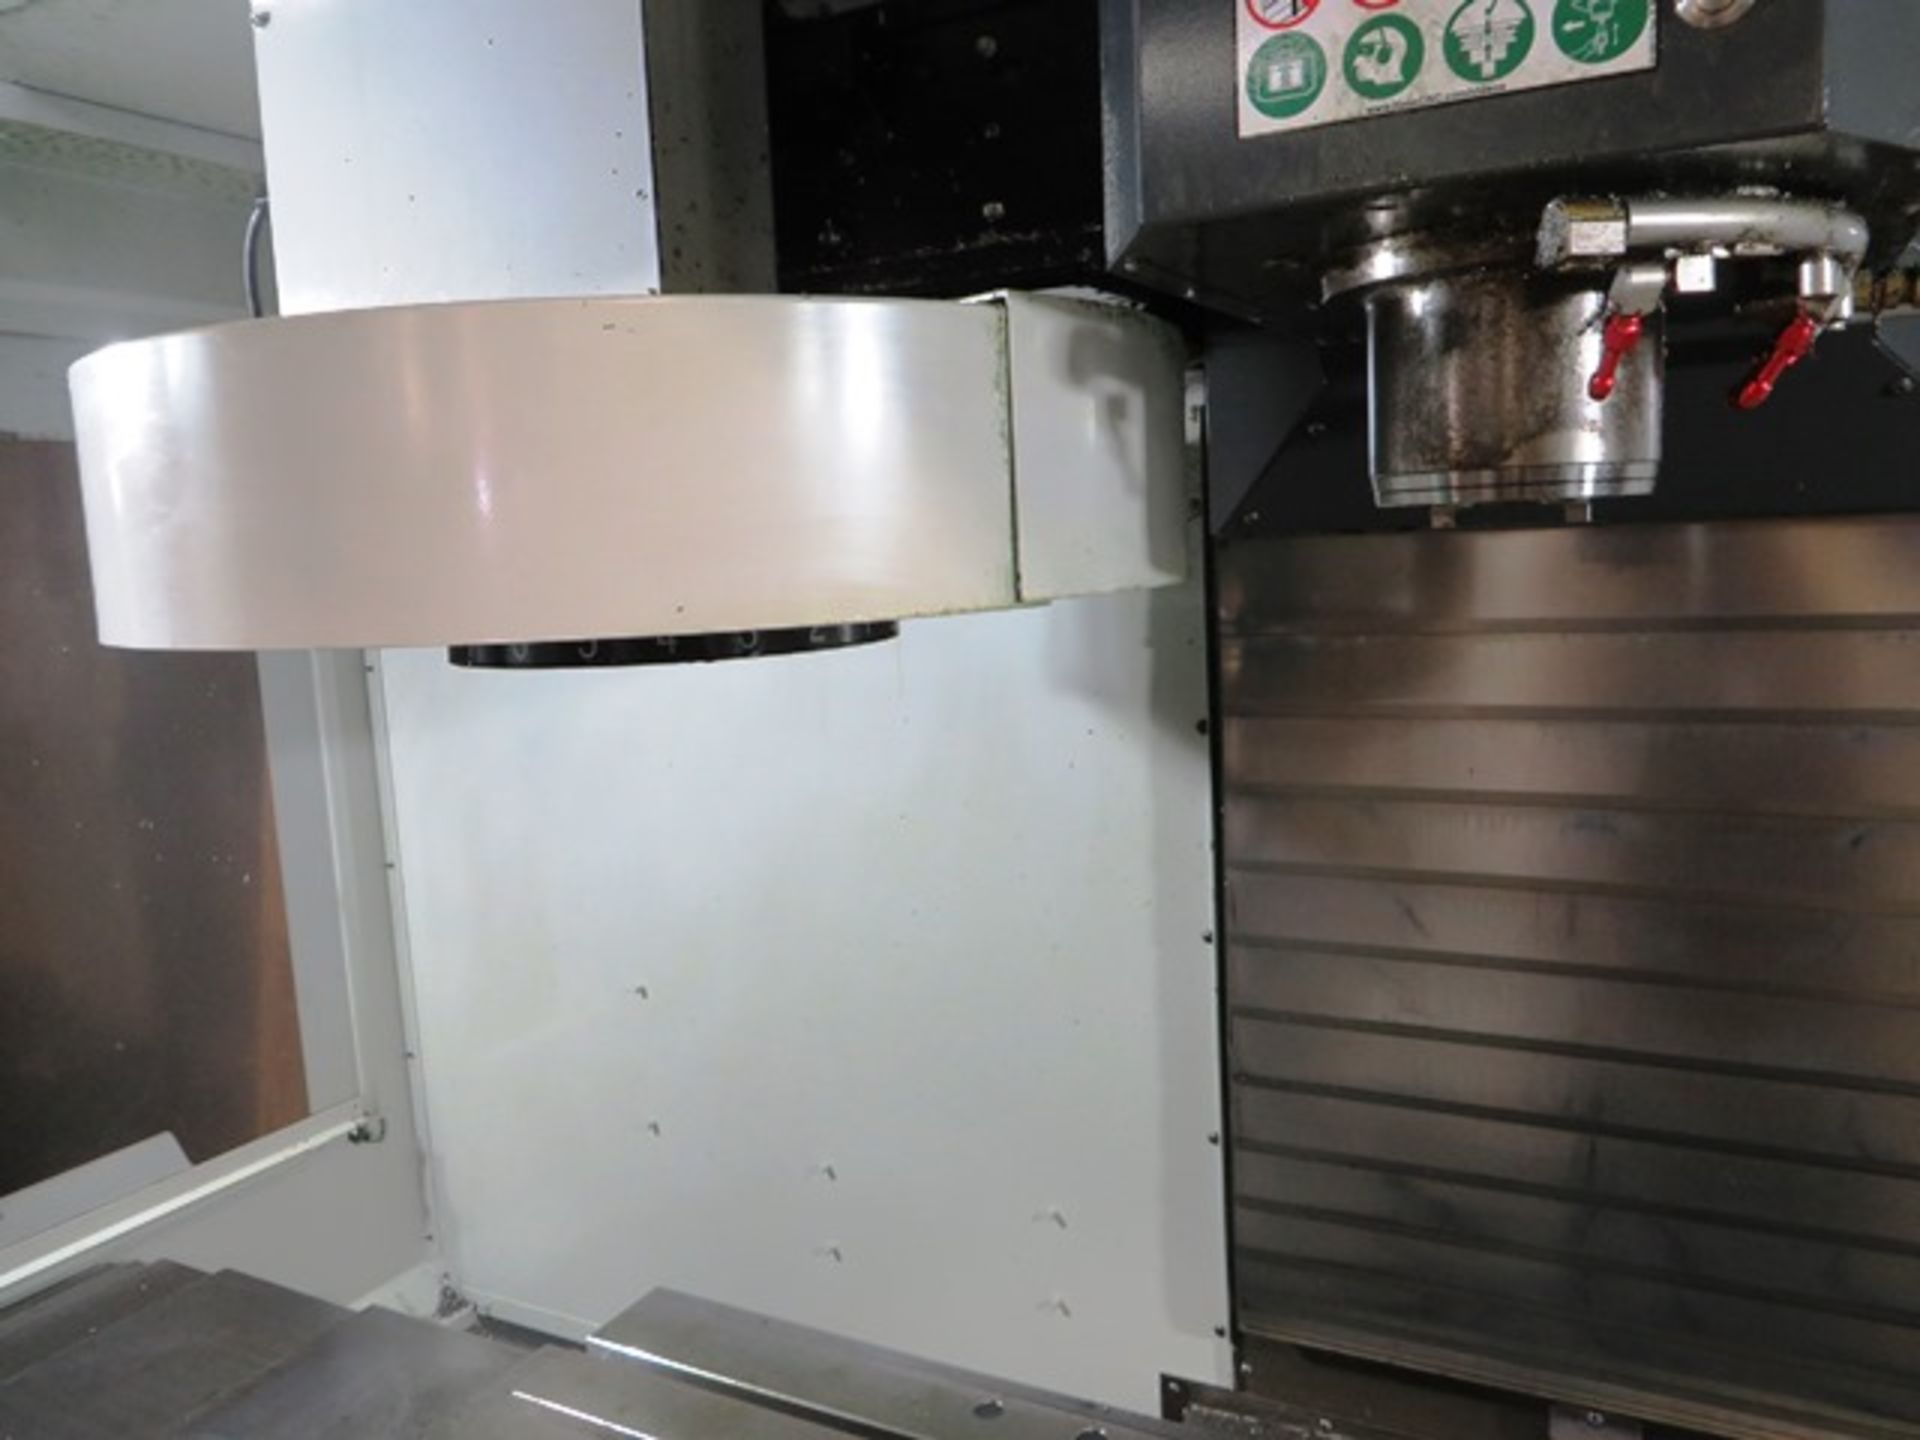 Haas VF-4 3-Axis CNC Vertical Machining Center - Image 5 of 7